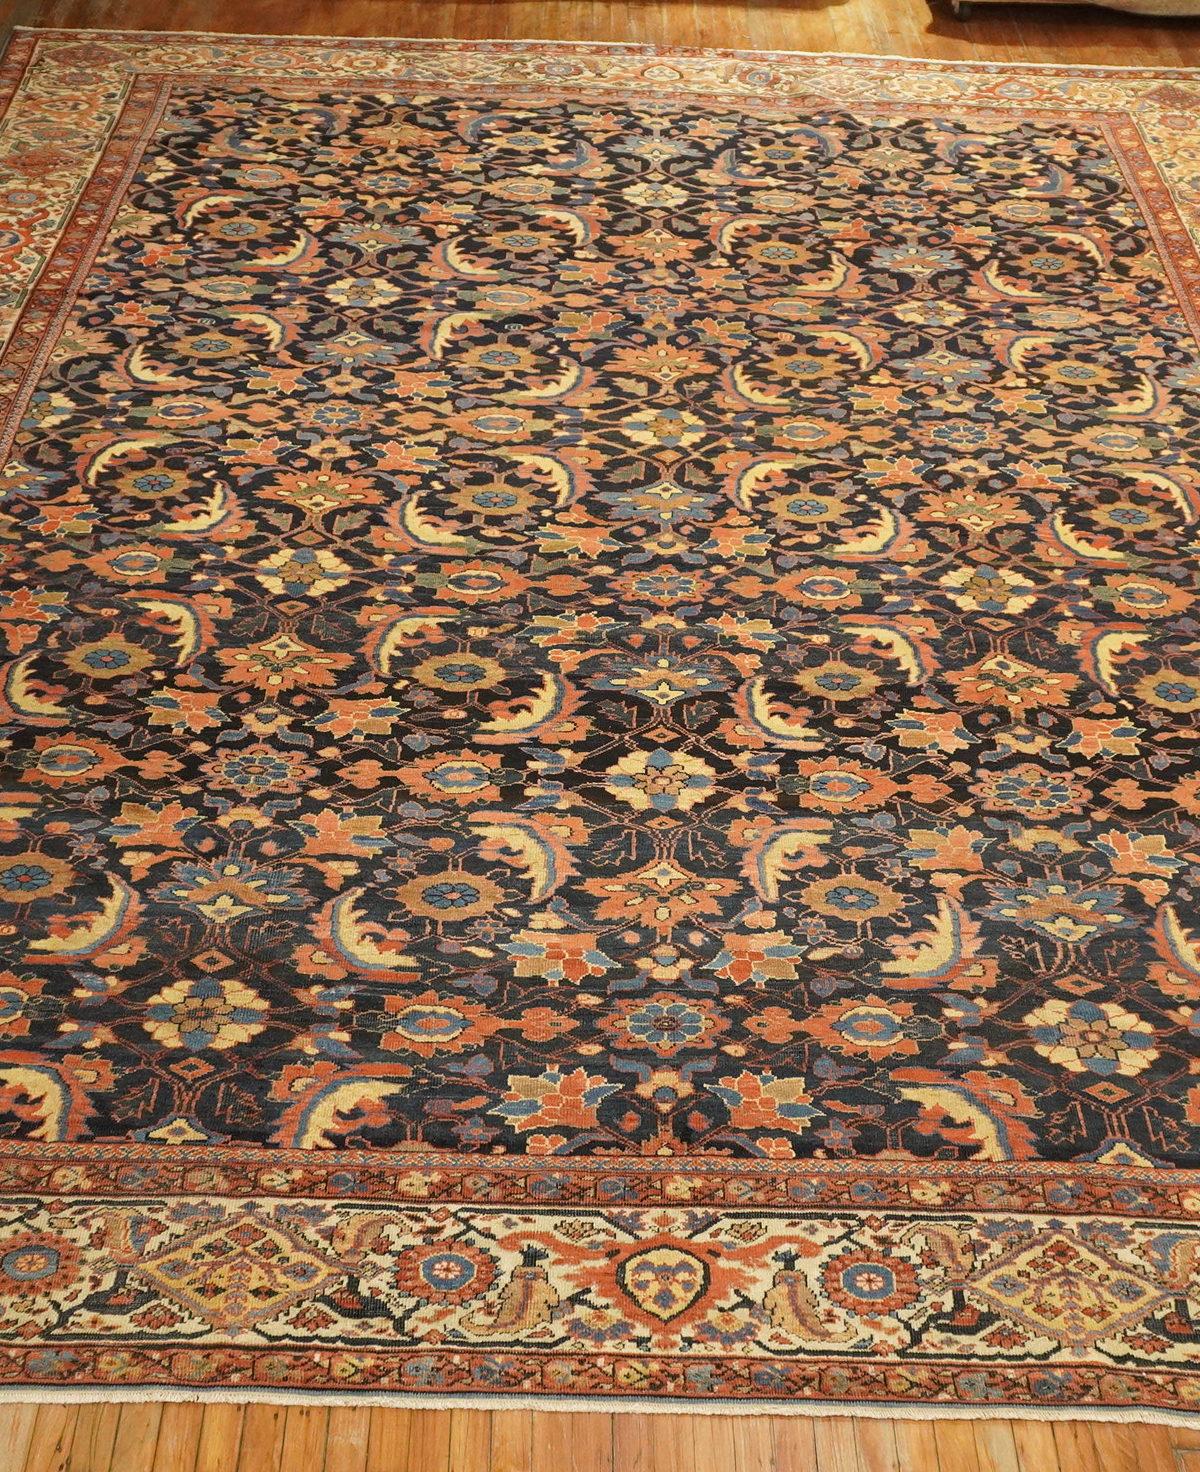 Masculine Large Antique Persian Mahal Sultanabad Rug, Early 20th Century For Sale 5